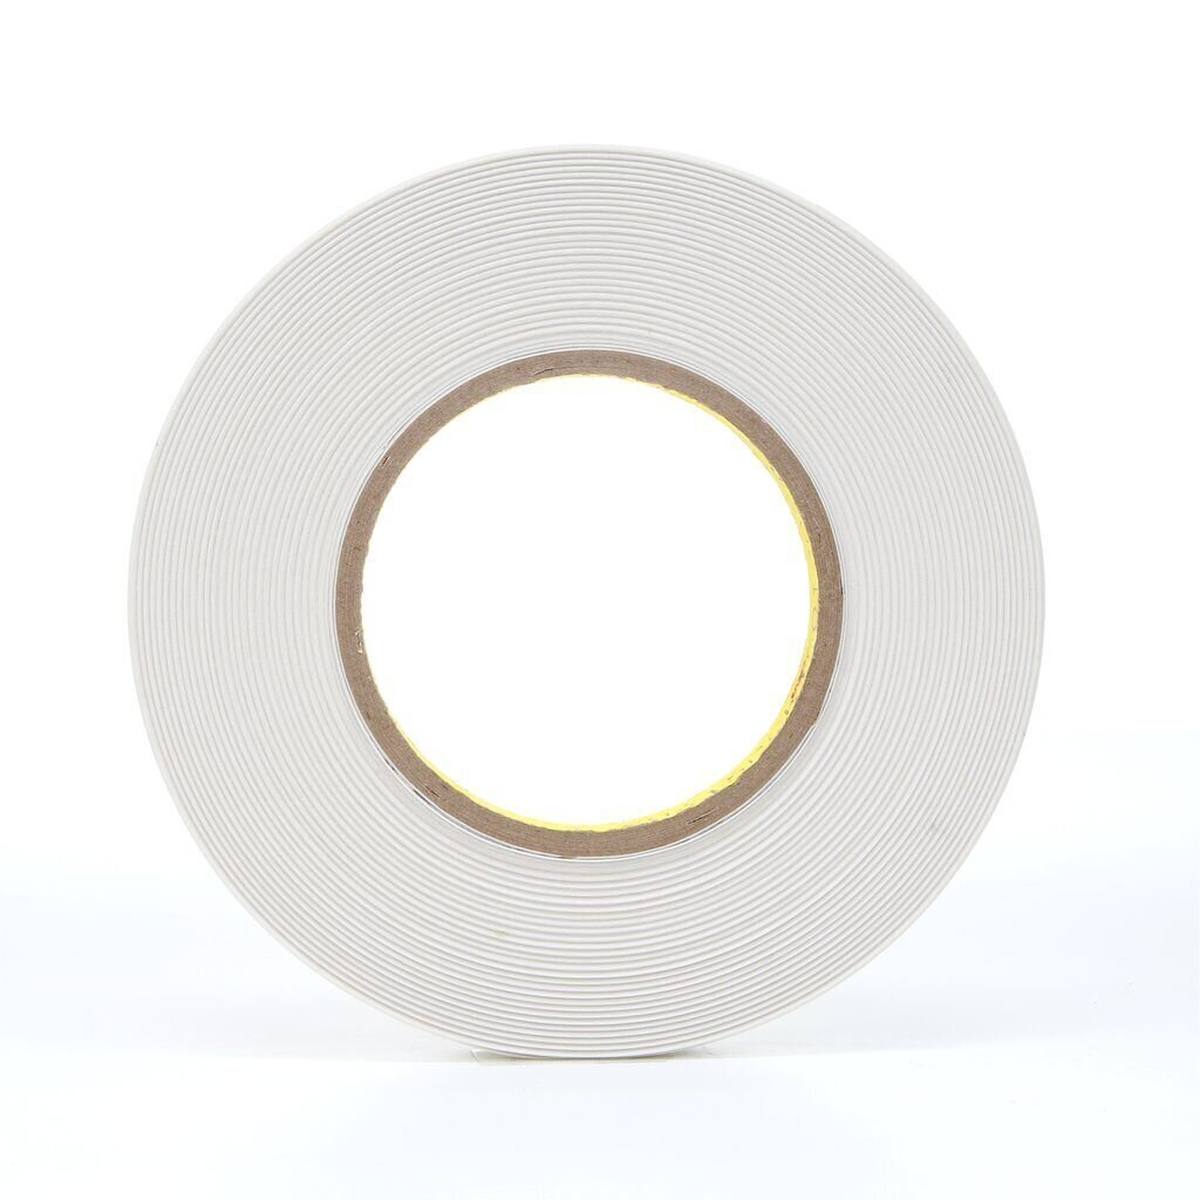 3M Double-sided adhesive tape with polyester backing 9415PC, translucent, 12.7 mm x 66 m, 0.05 mm